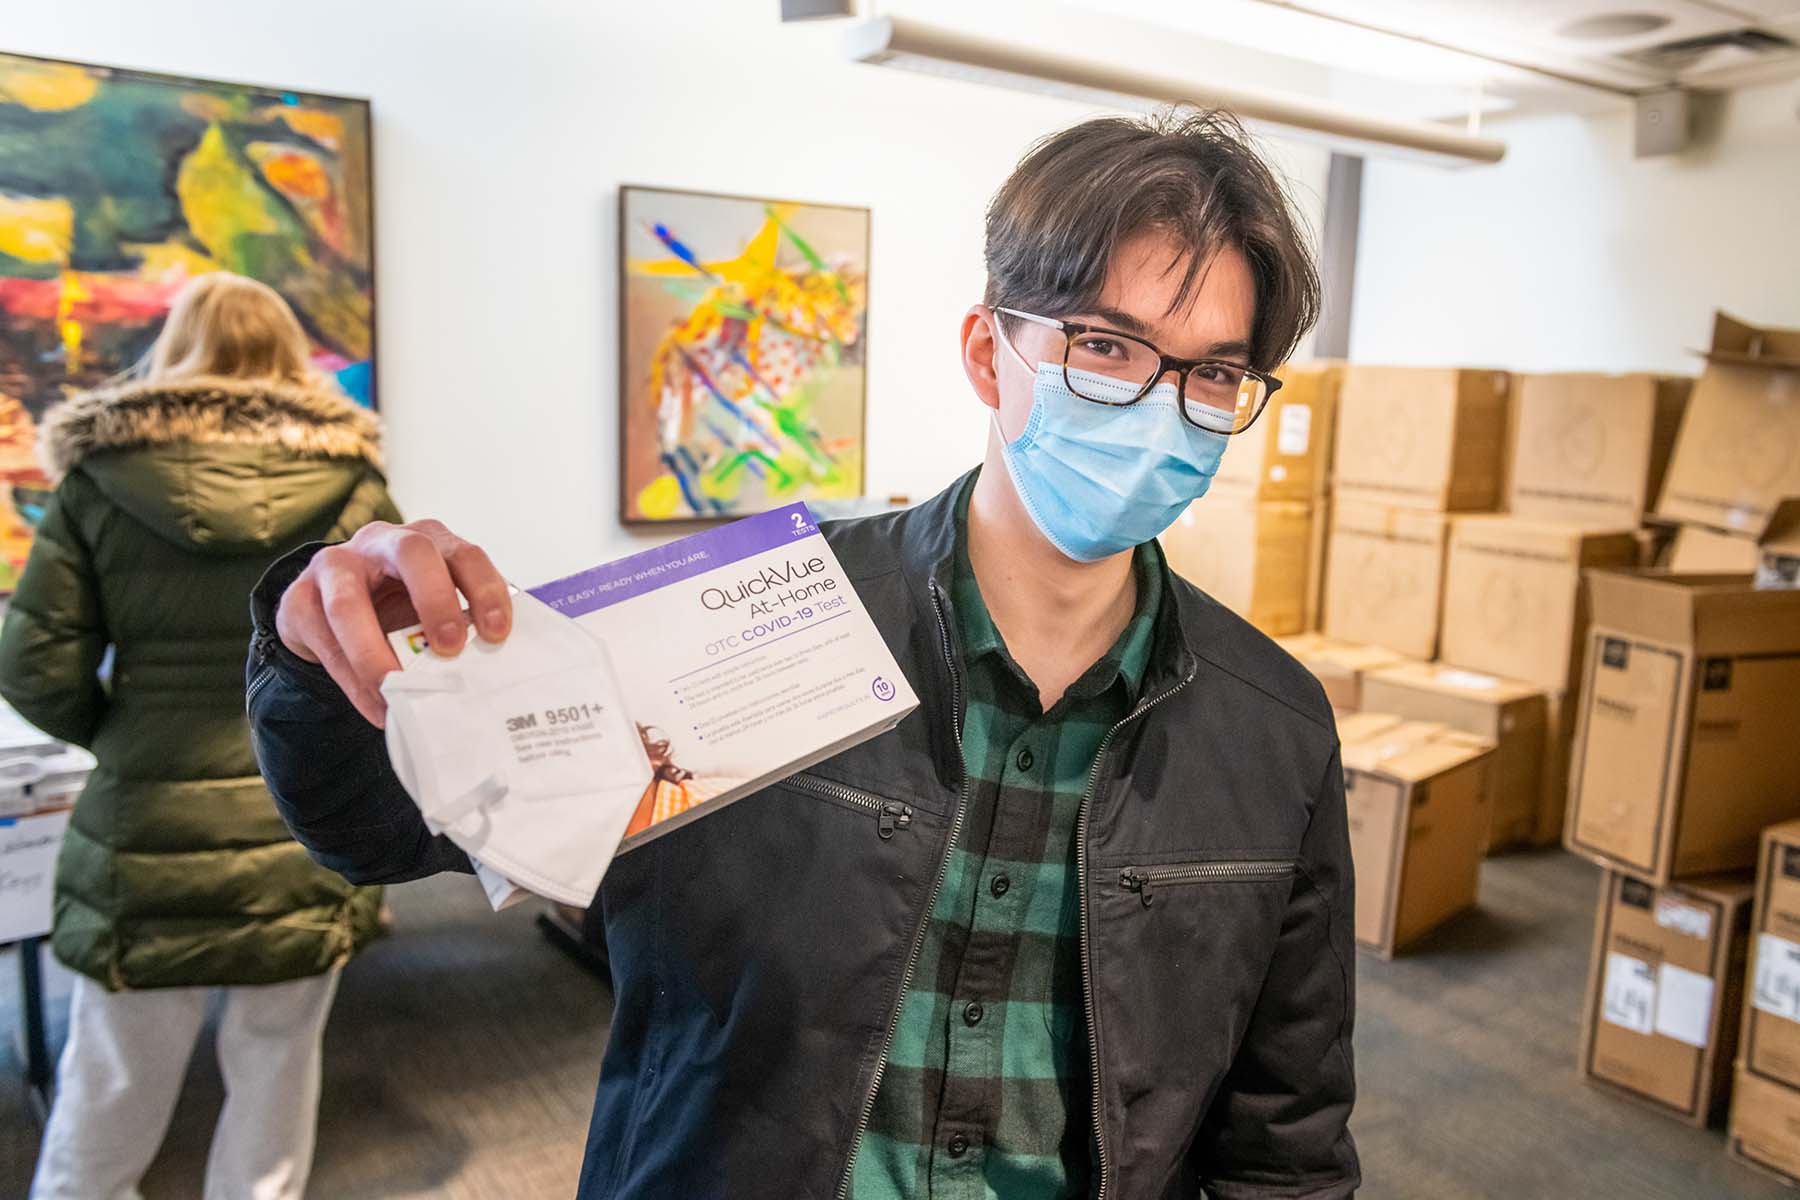 All students were issued tight-fitting KN95 masks and home COVID-19 test kits as they moved back to the campus.